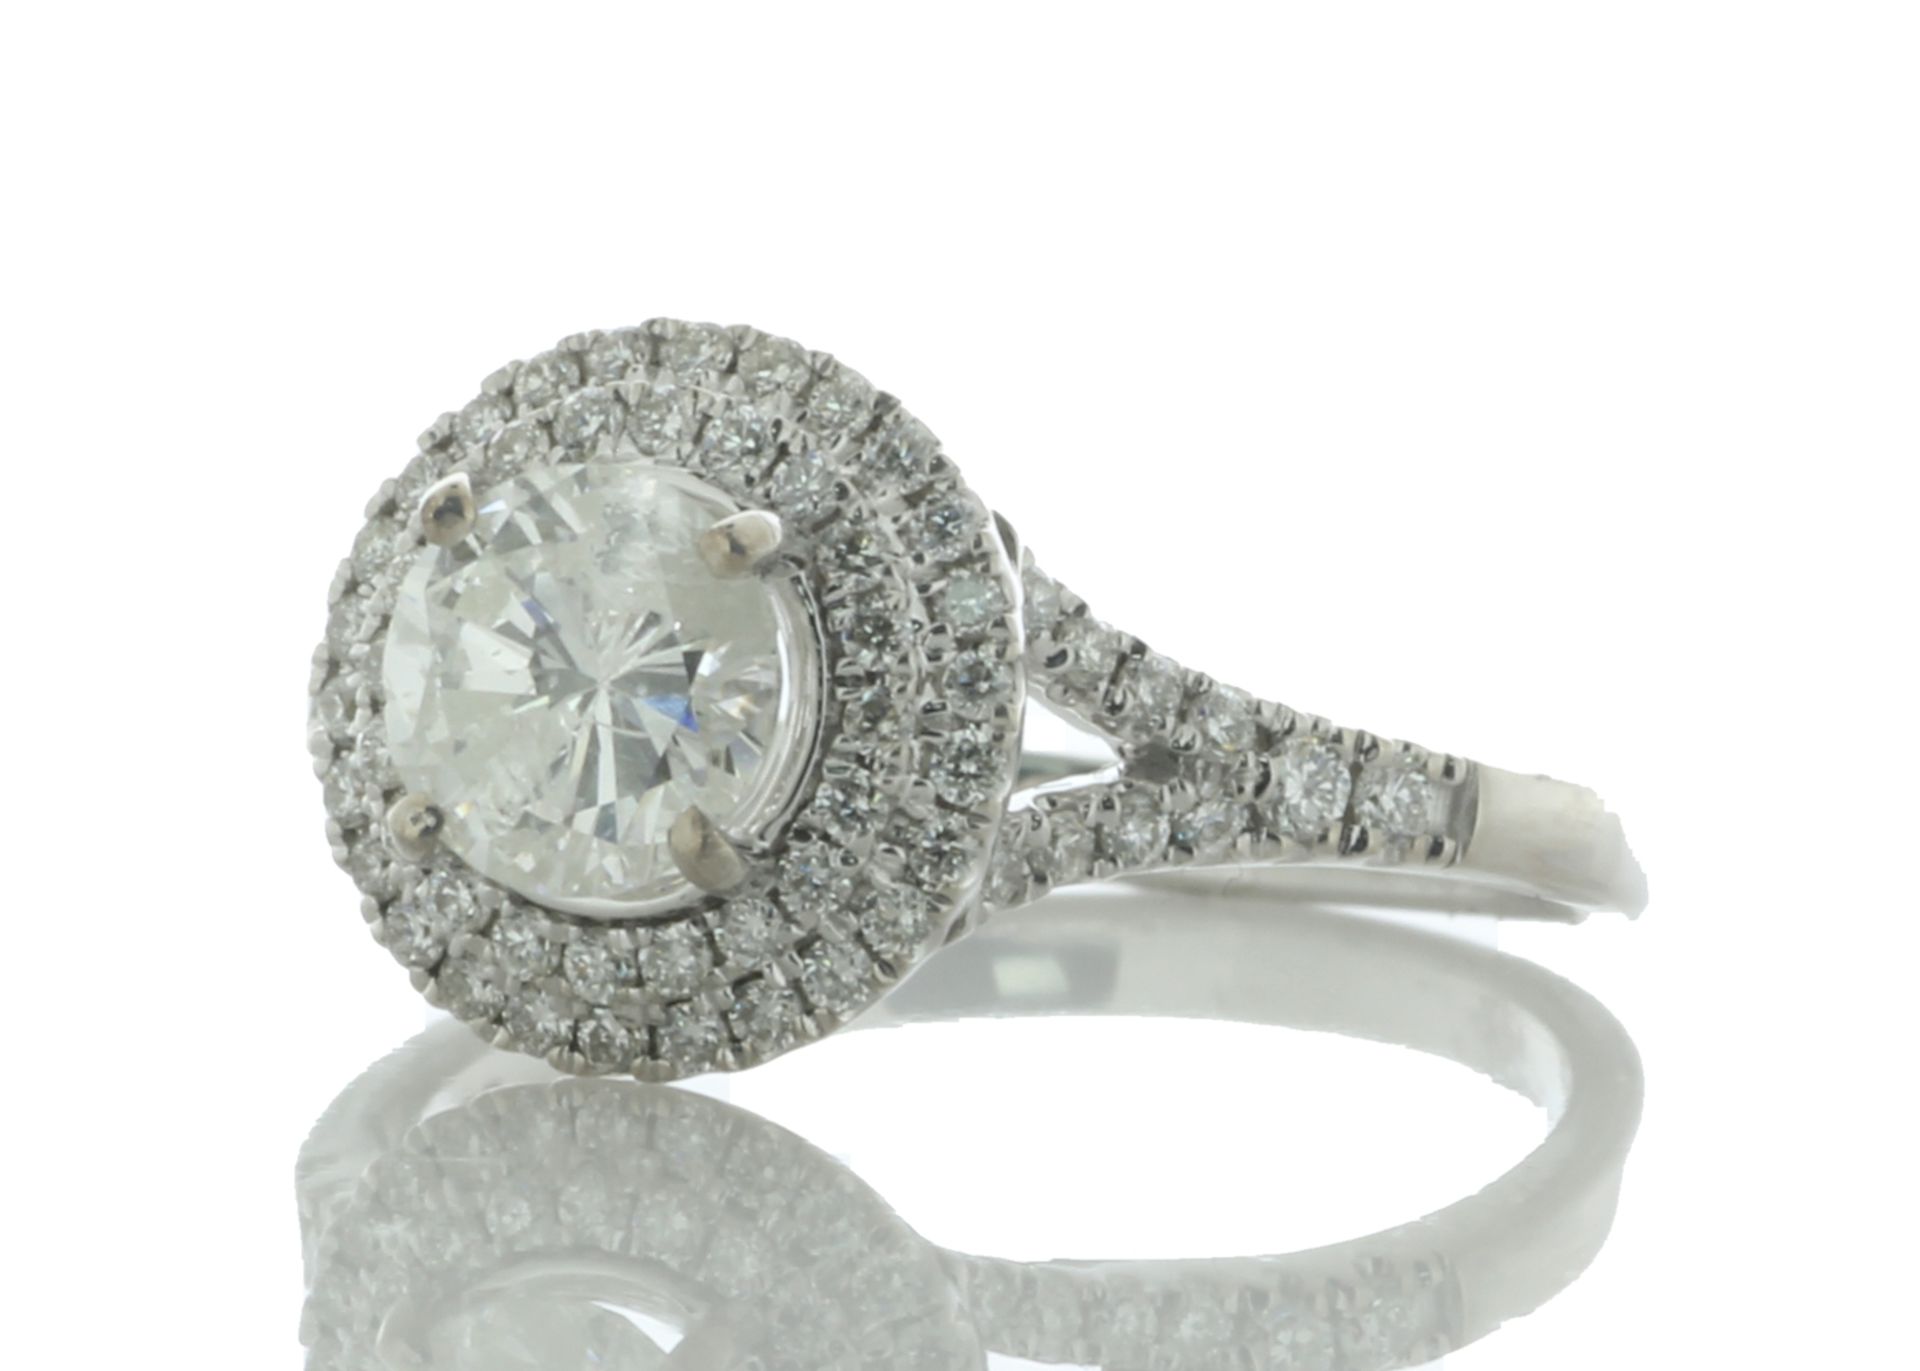 18ct White Gold Single Stone With Halo Setting Ring (0.86) 1.21 Carats - Valued By GIE £16,950. - Image 2 of 5